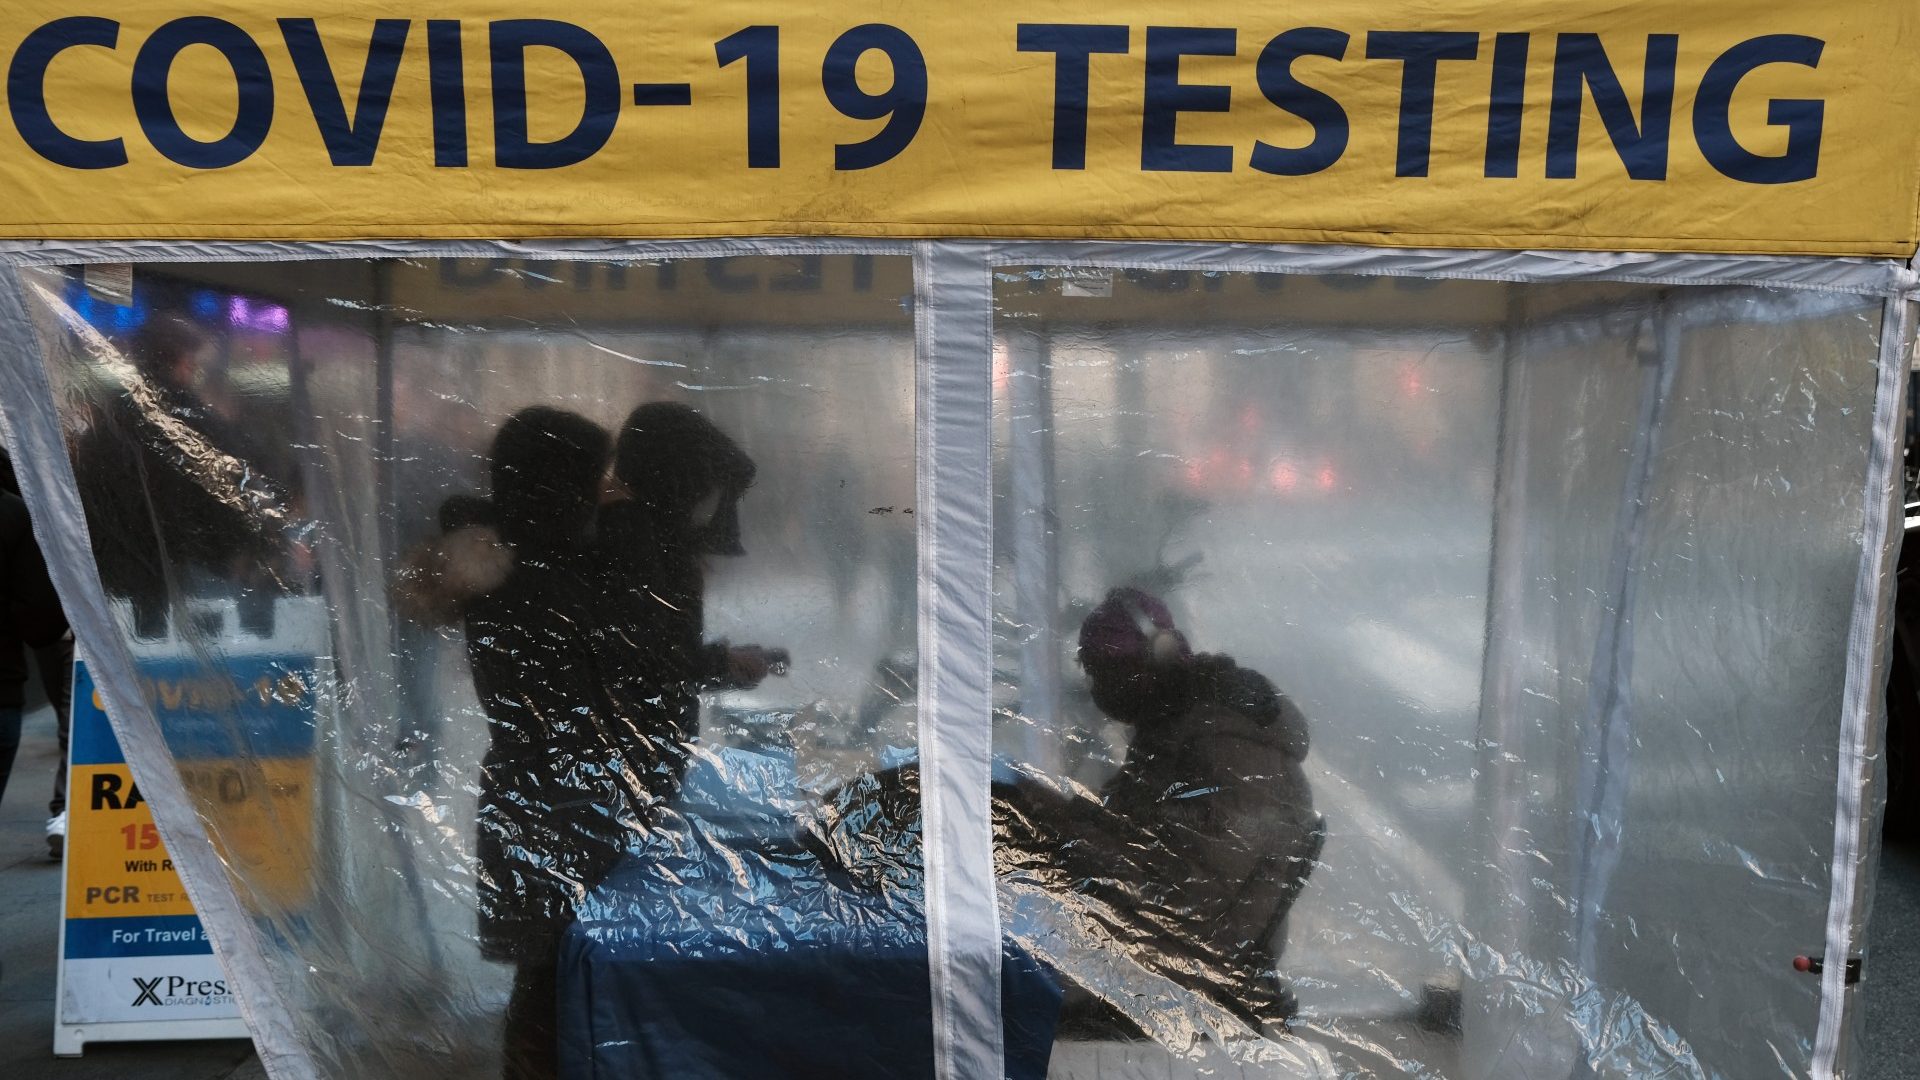 Covid-19 tests in New York, United States, on December 9, 2022. (Credit: Spencer Platt/Getty Images)